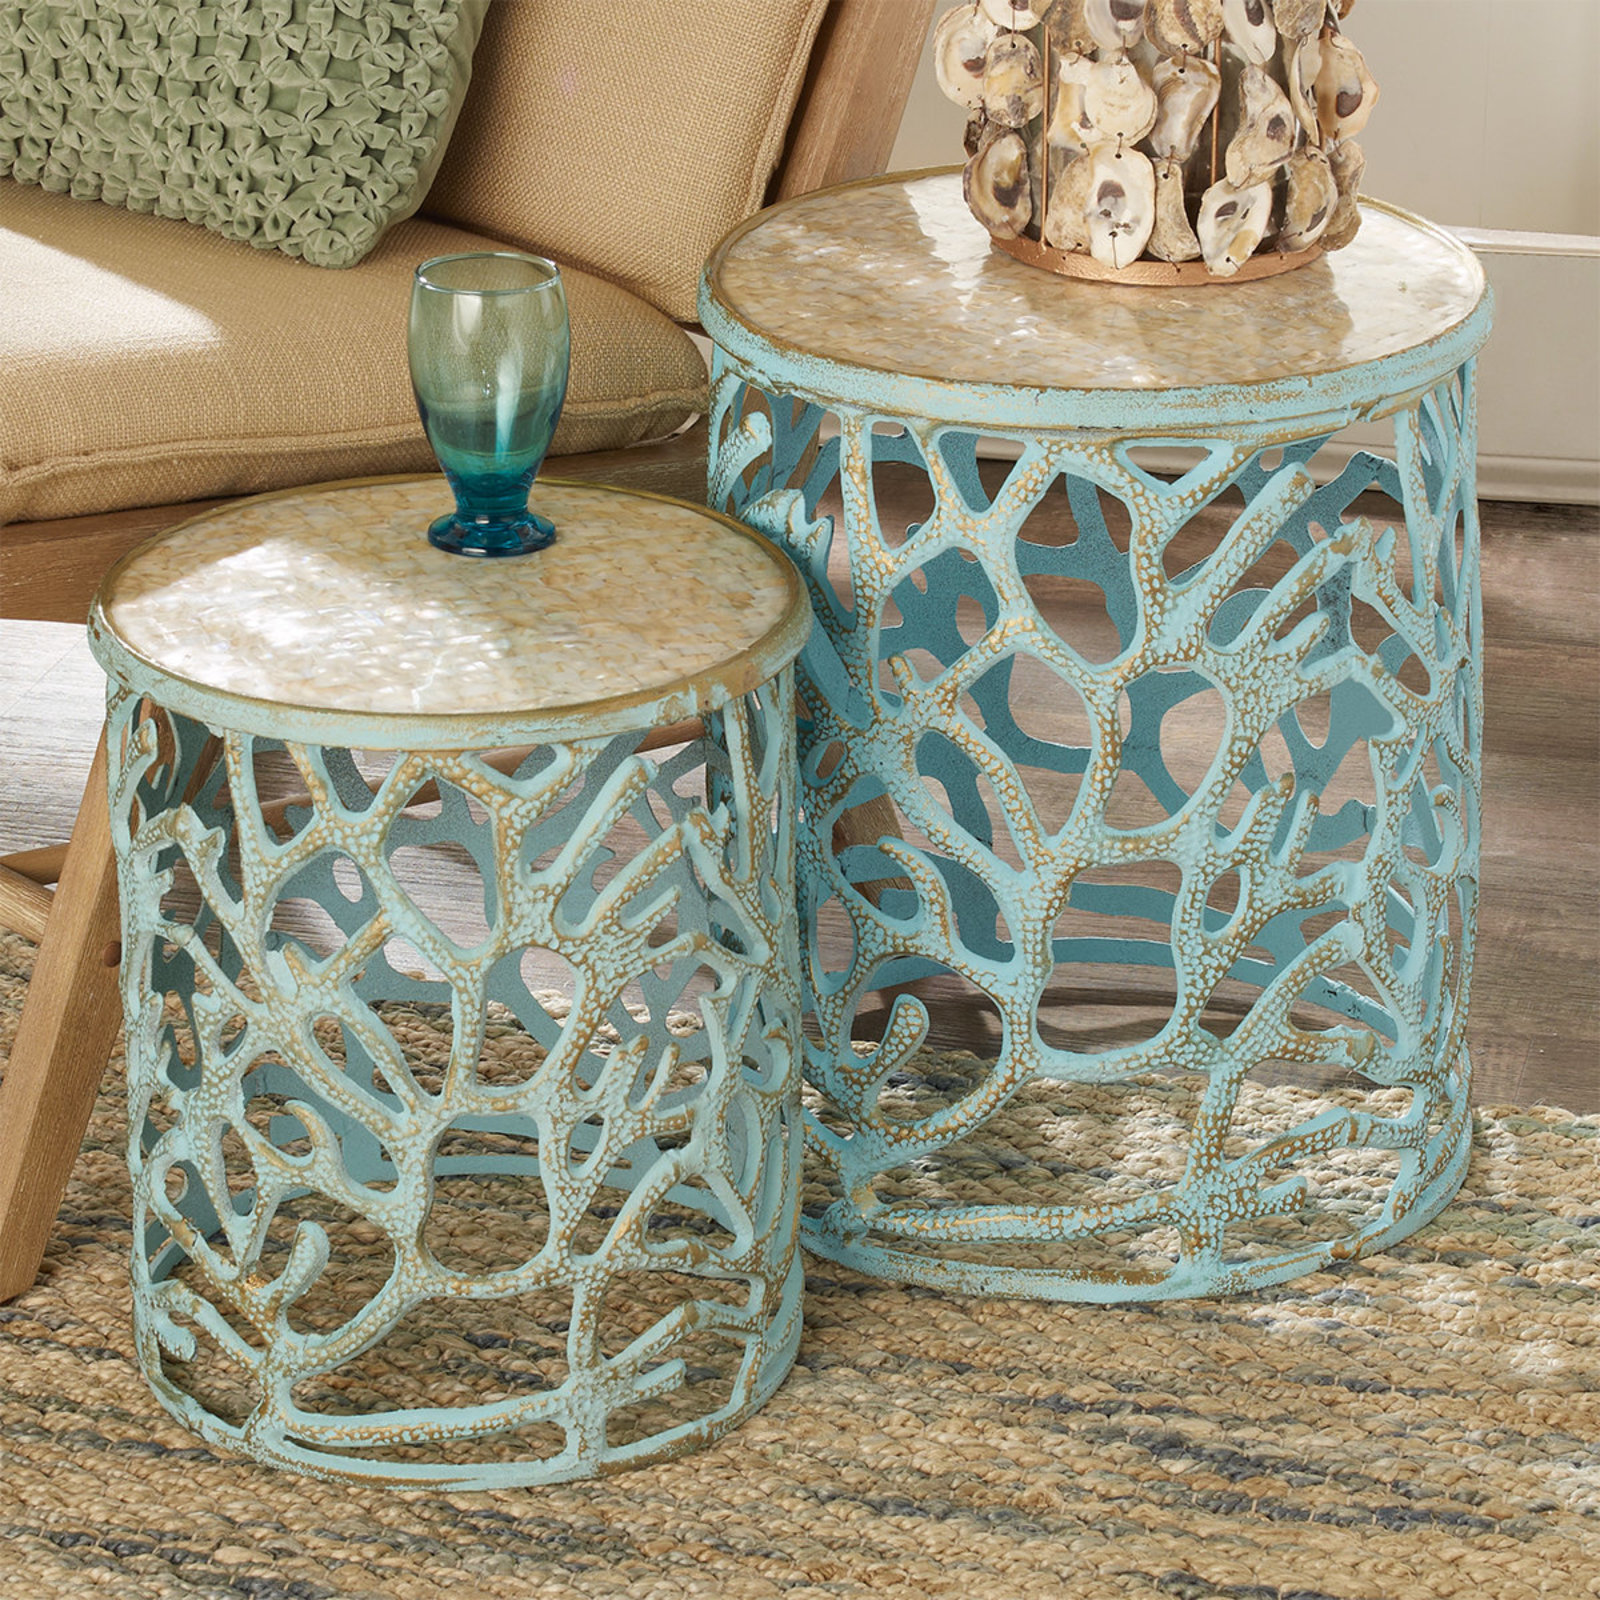 mother pearl coral accent tables shades light green metal table pear weathered blue small brass and glass coffee modern fixtures wood bedside hampton bay patio furniture legs ikea